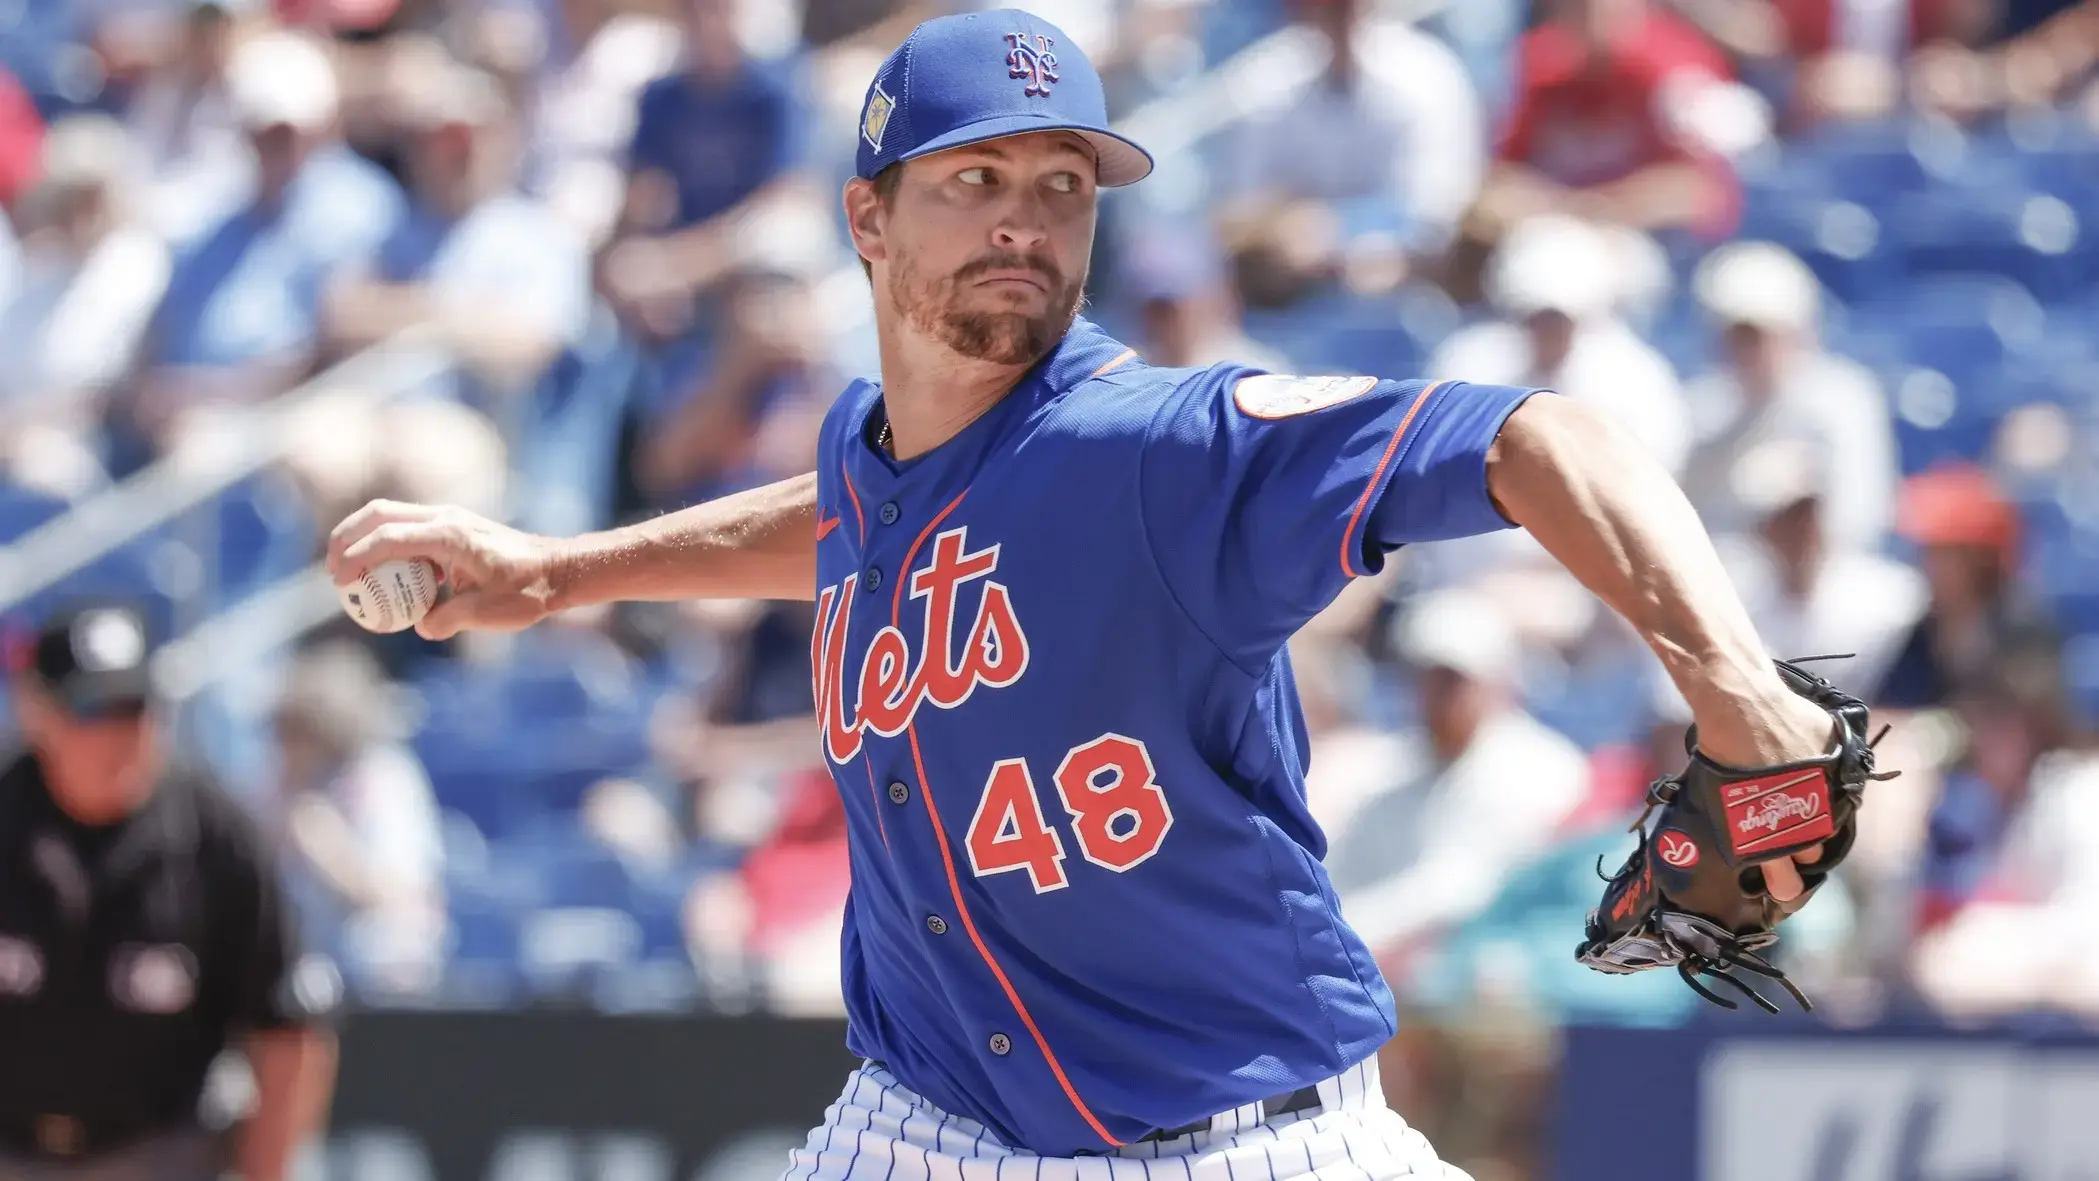 Mar 27, 2022; Port St. Lucie, Florida, USA; New York Mets starting pitcher Jacob deGrom (48) throws a pitch in the first inning during spring training against the St. Louis Cardinals at Clover Park. / Reinhold Matay-USA TODAY Sports